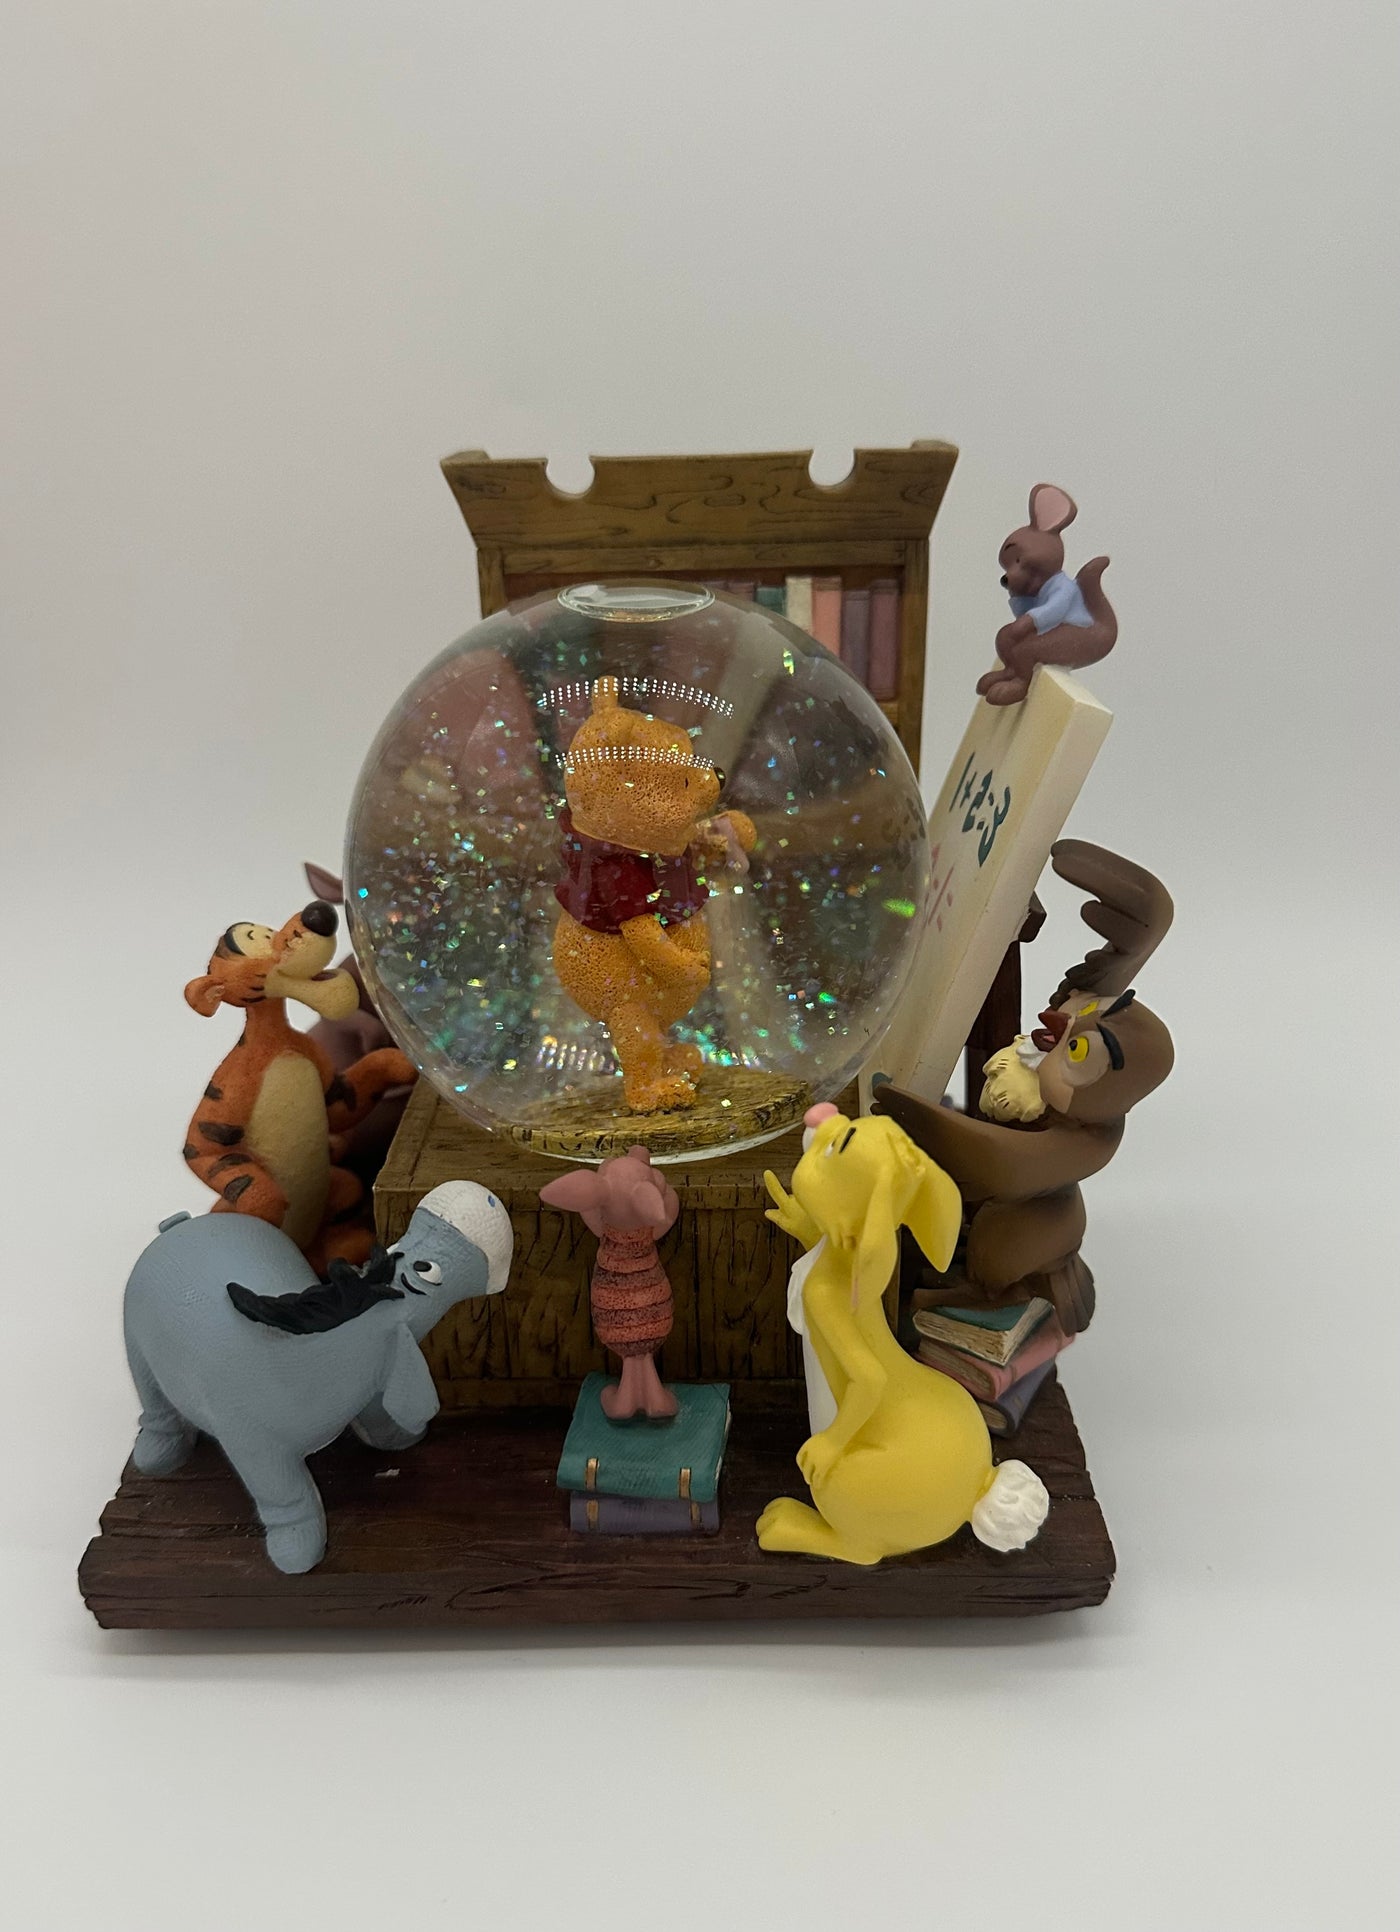 Disney Store Exclusive Winnie the Pooh and Friends Musical Snowglobe New w Box